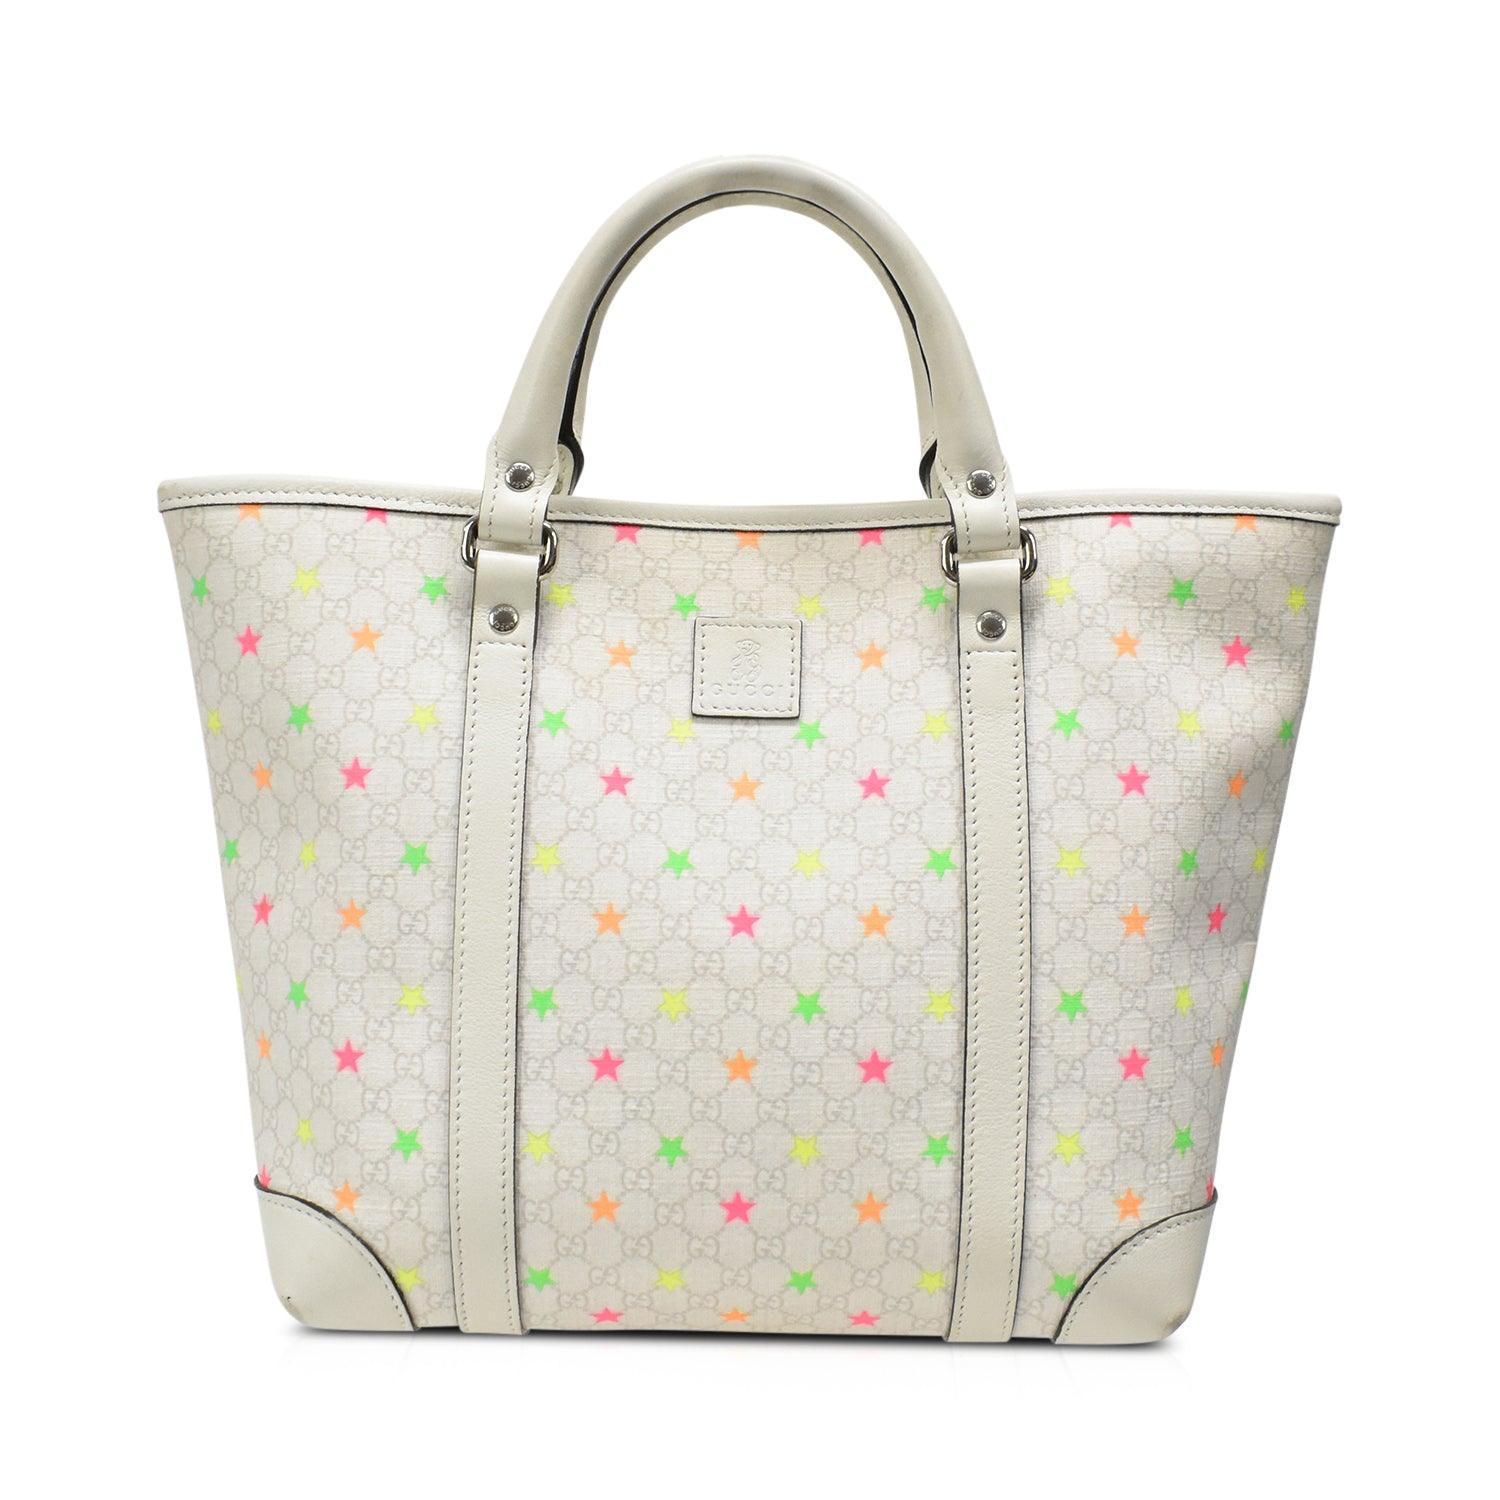 Gucci 'Micro' Tote Bag - Fashionably Yours